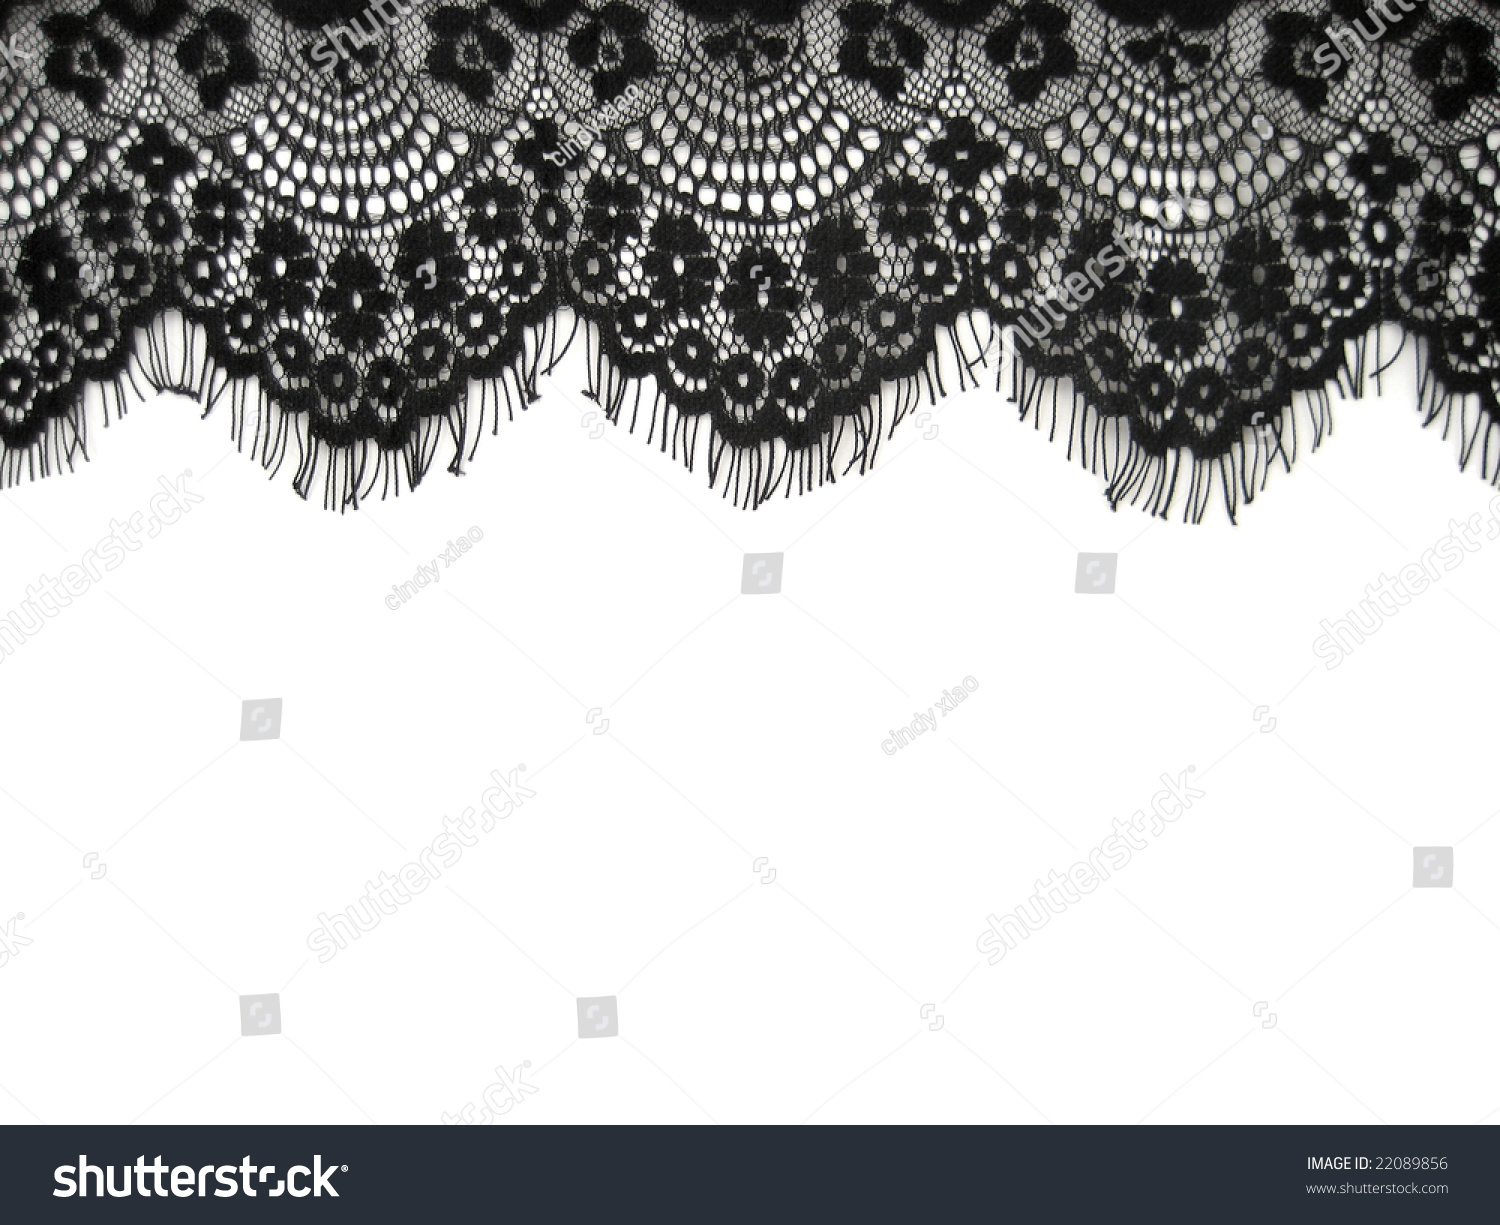 Black Lace On White Stock Photo 22089856 - Shutterstock